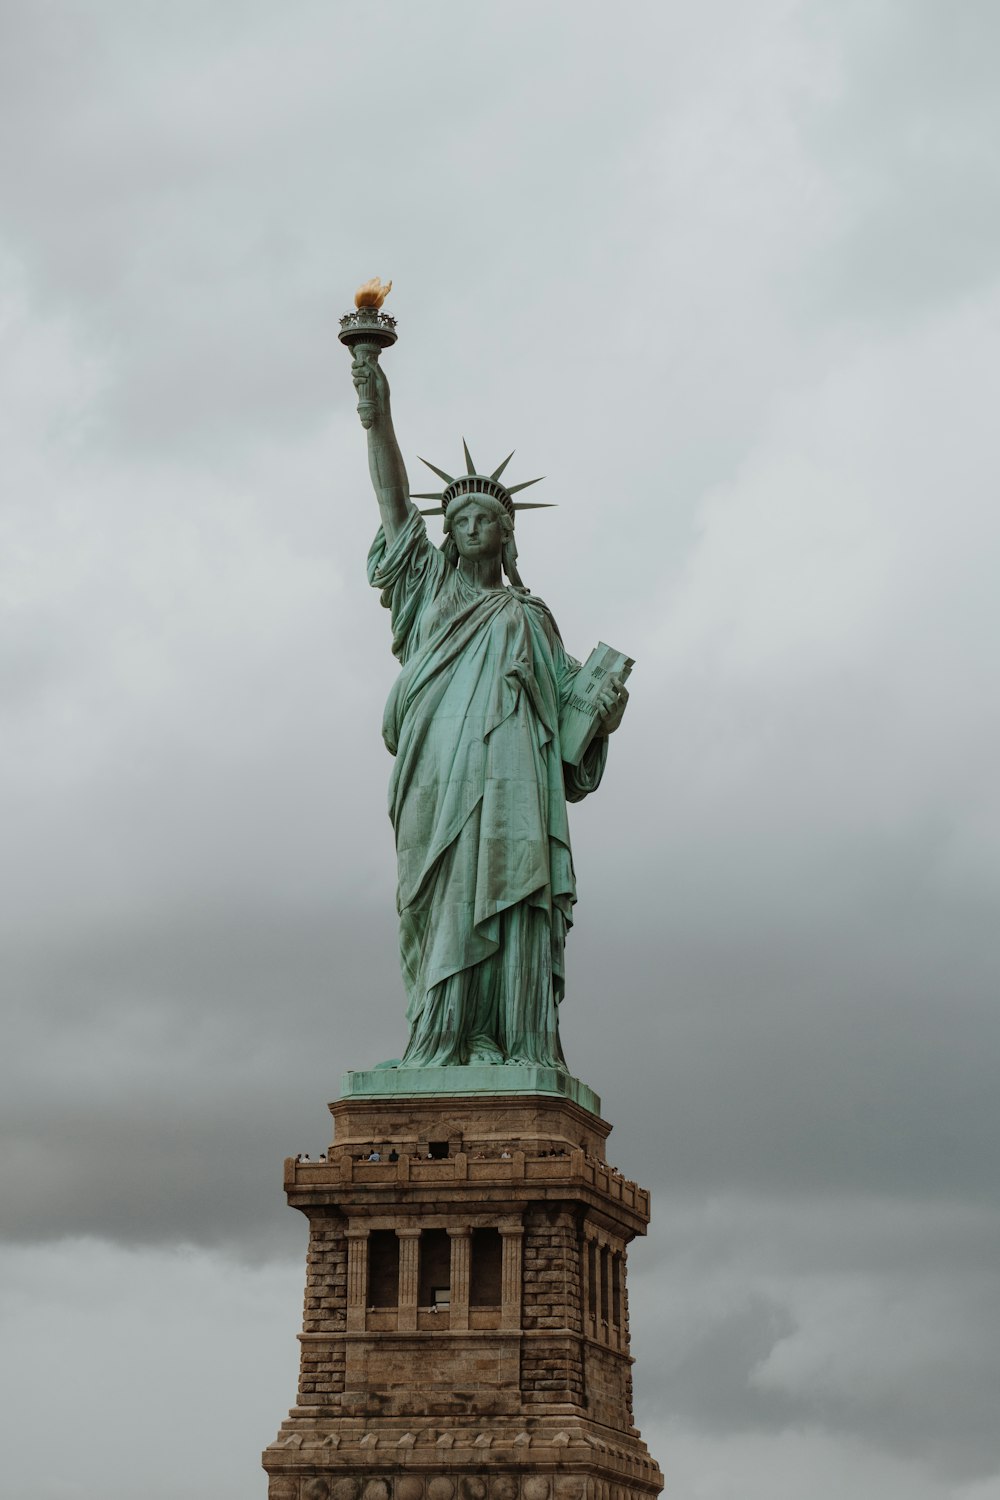 Statue of Liberty under gray sky at daytime